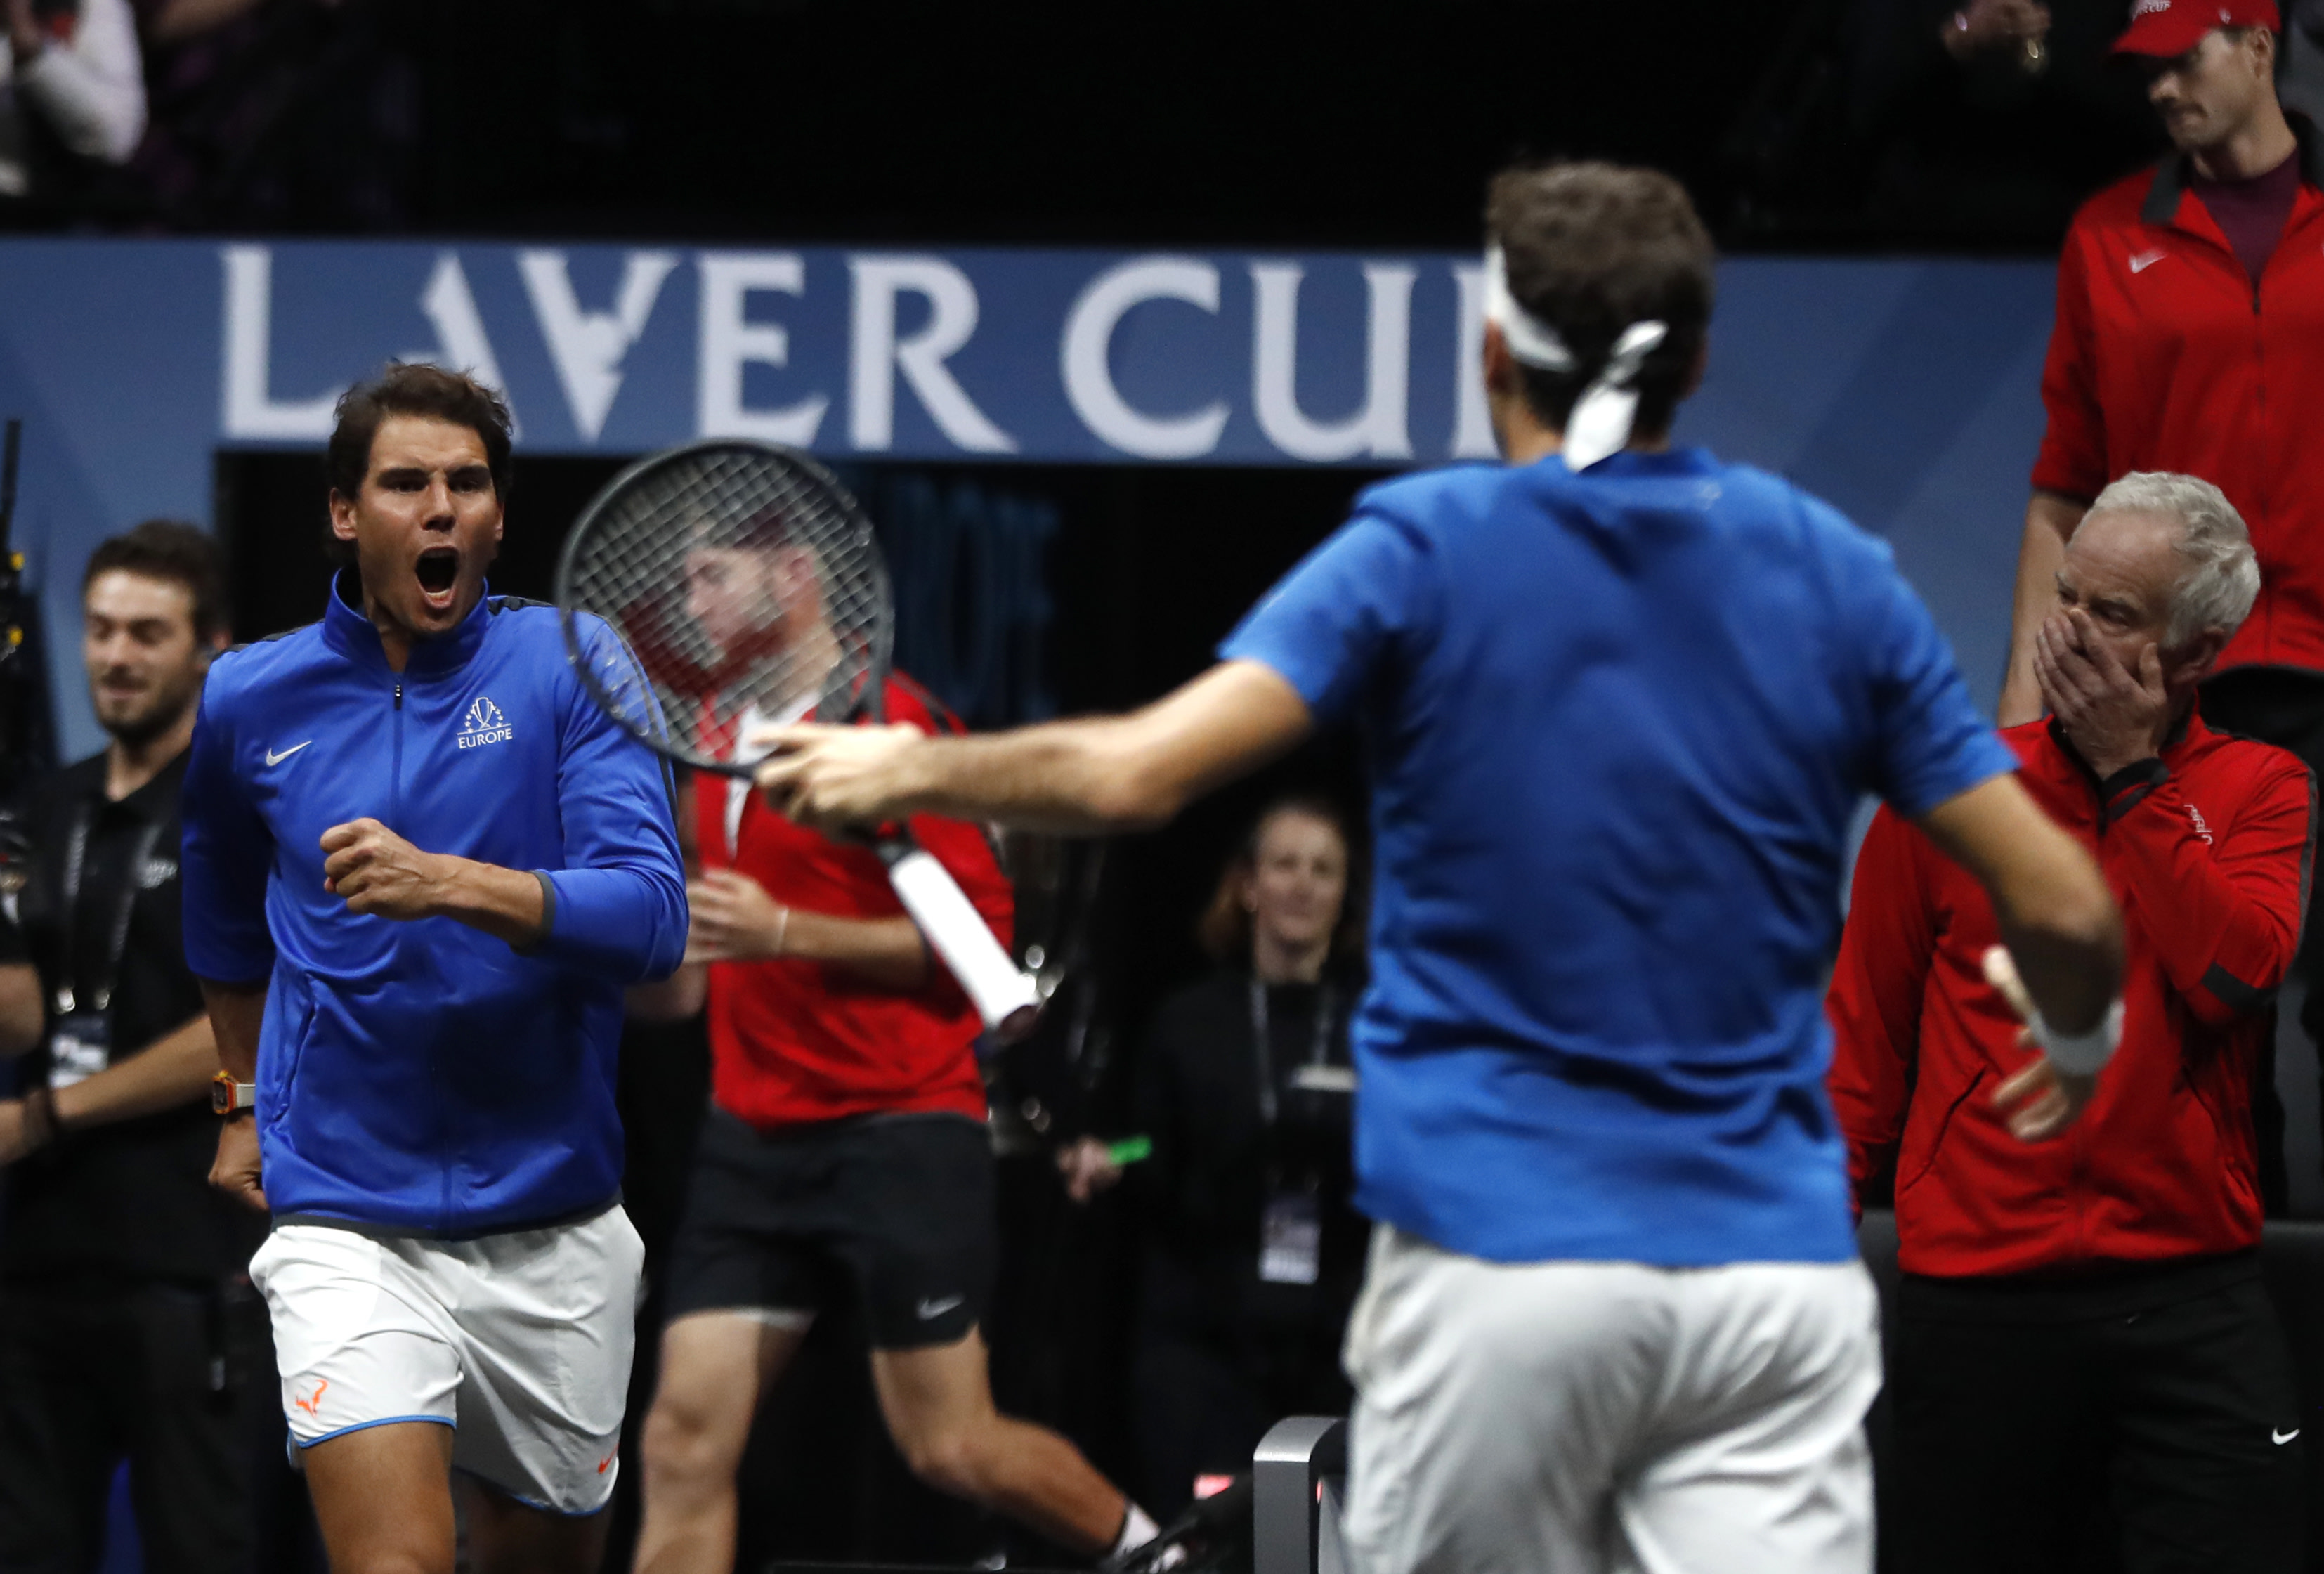 Roger Federer clinches Laver Cup for Team Europe with win over Kyrgios